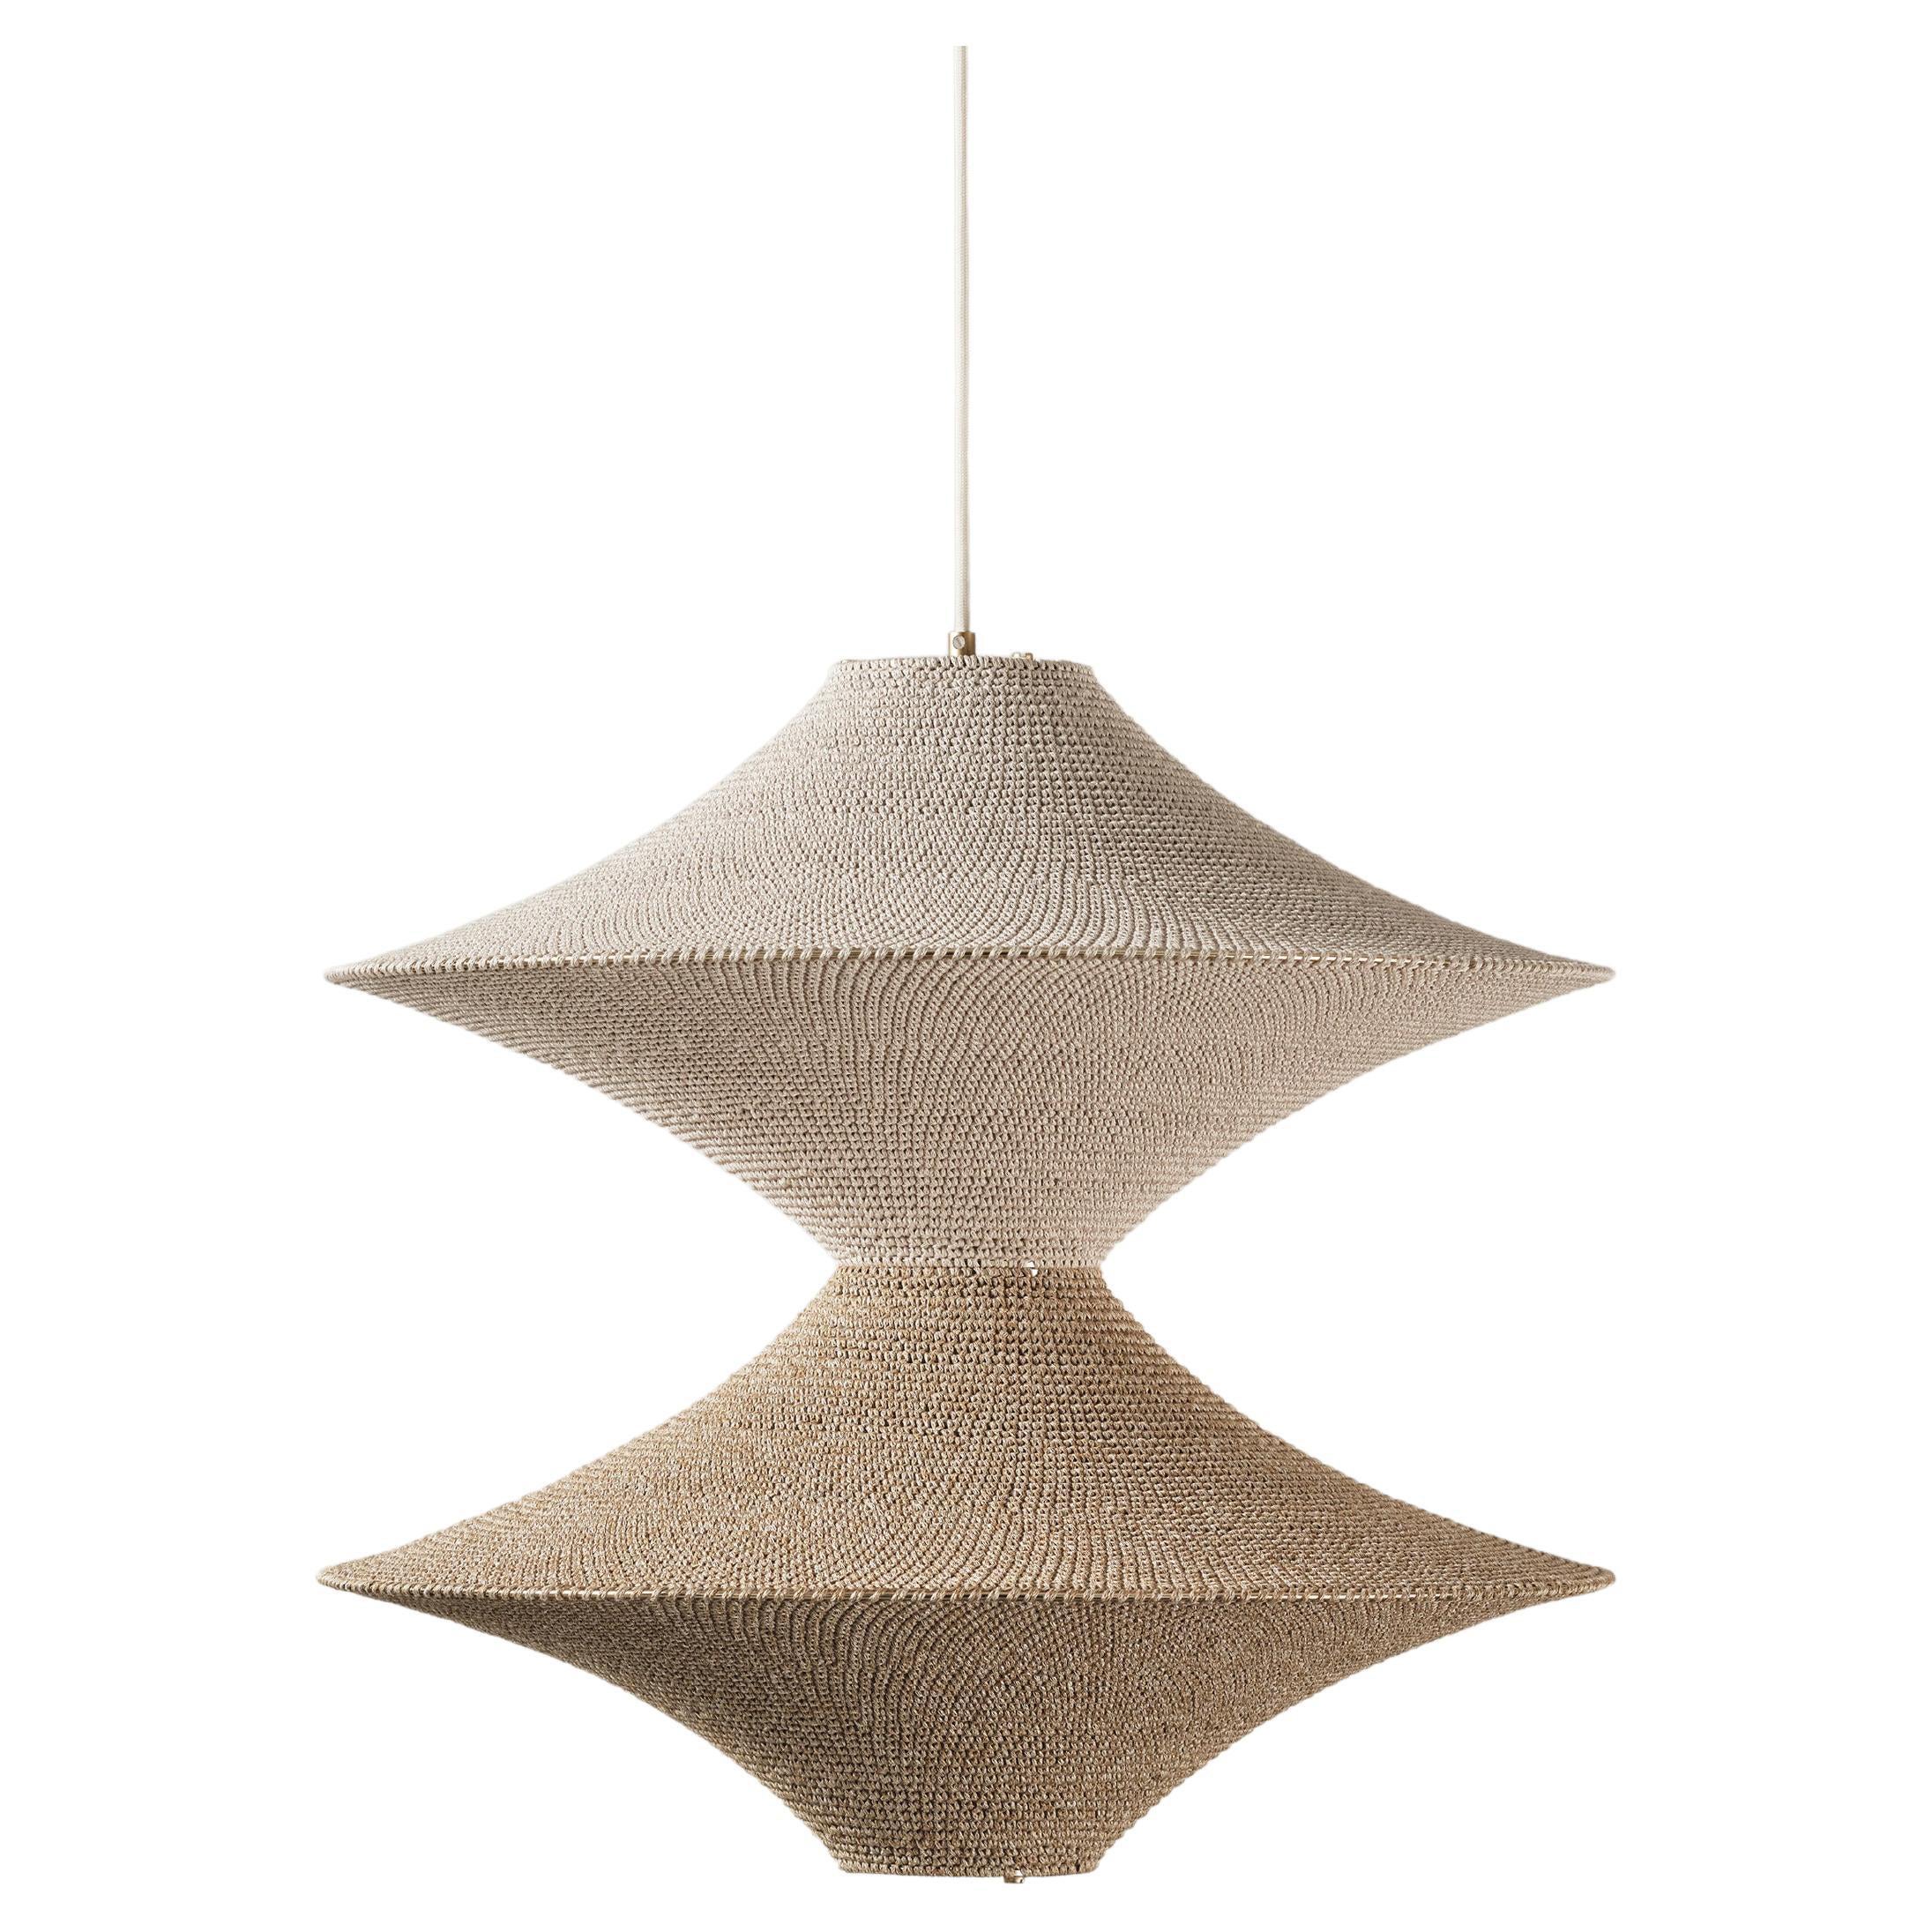 BAMBOO SOLITAIRE 02 Pendant Light Ø50cm/19.7in, Hand Crocheted in Bamboo Paper